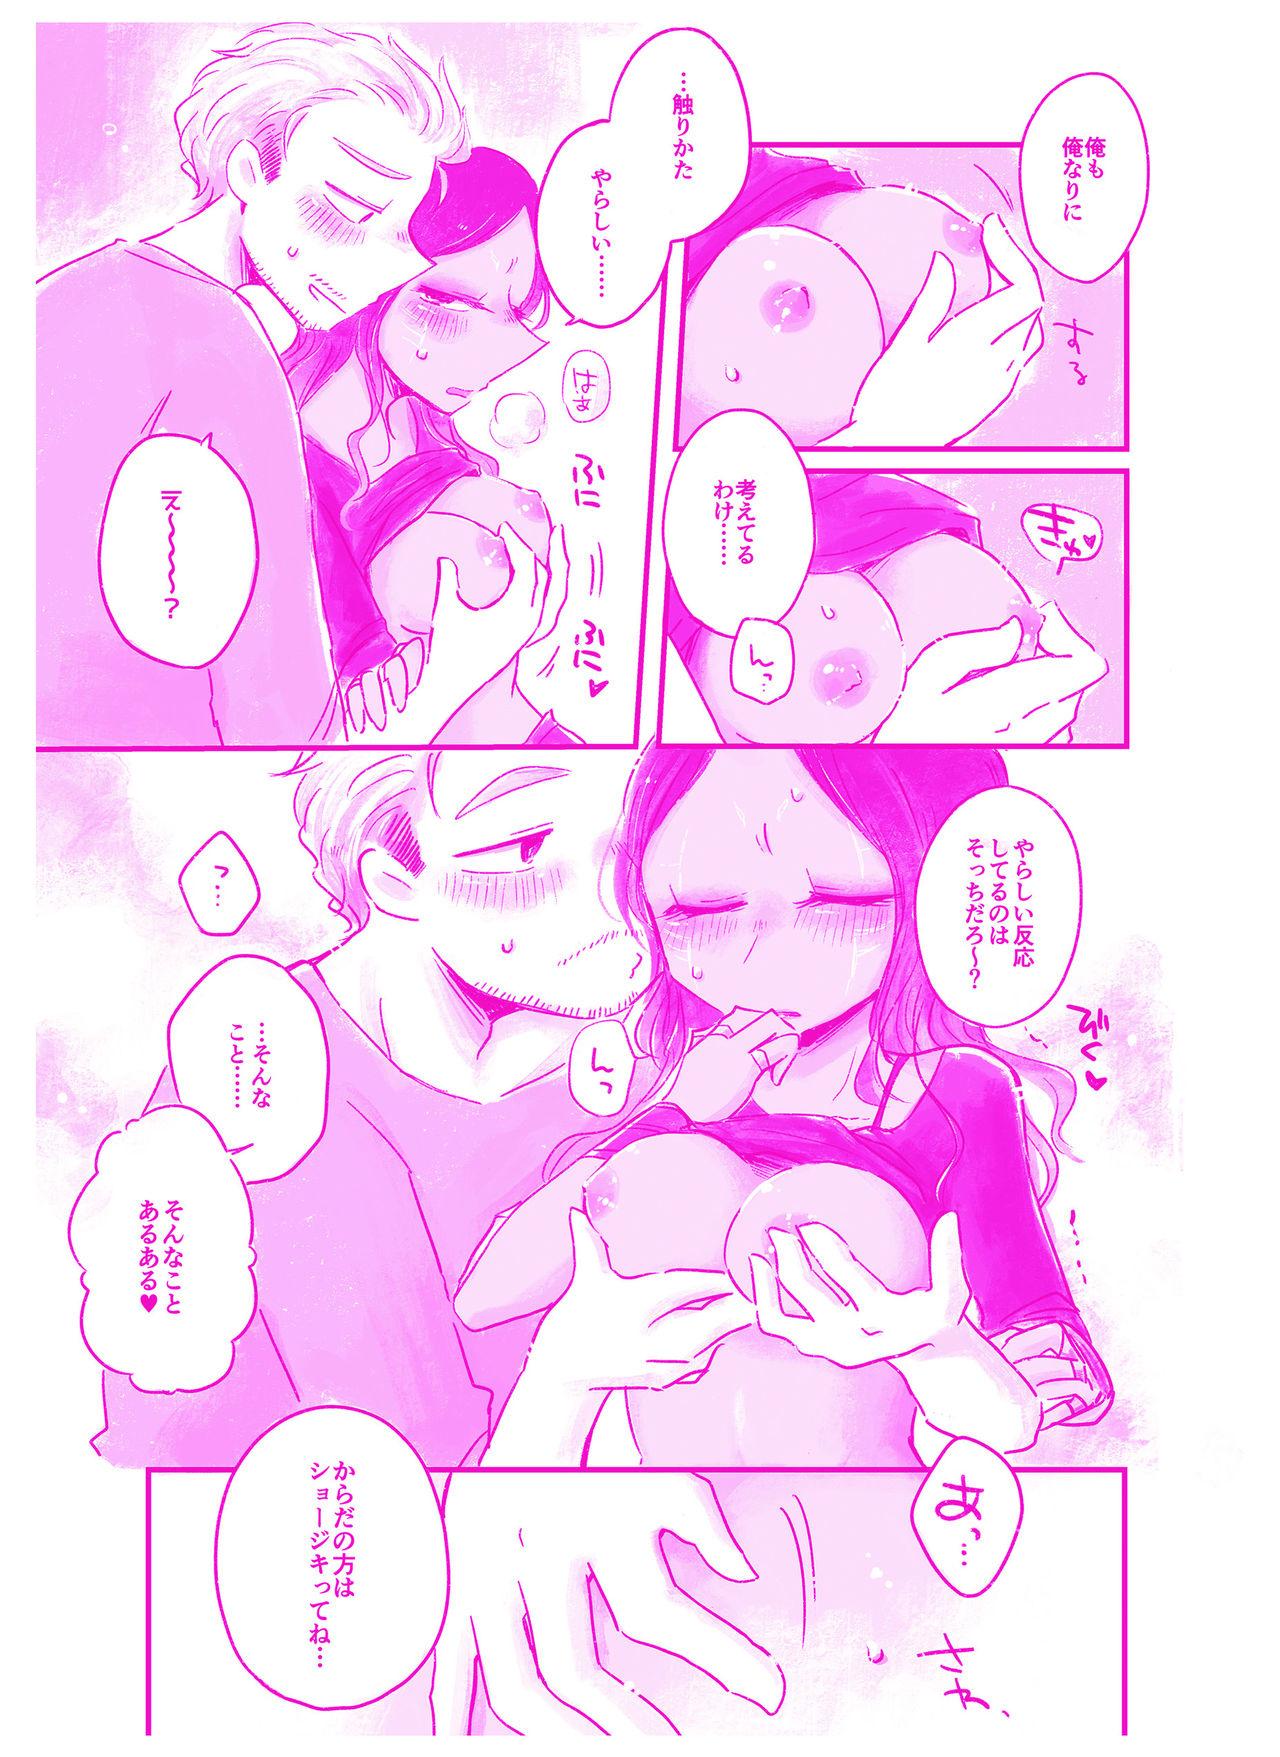 Orgasmus 言われてみてえもんだ - Guardians of the galaxy Boys - Page 6